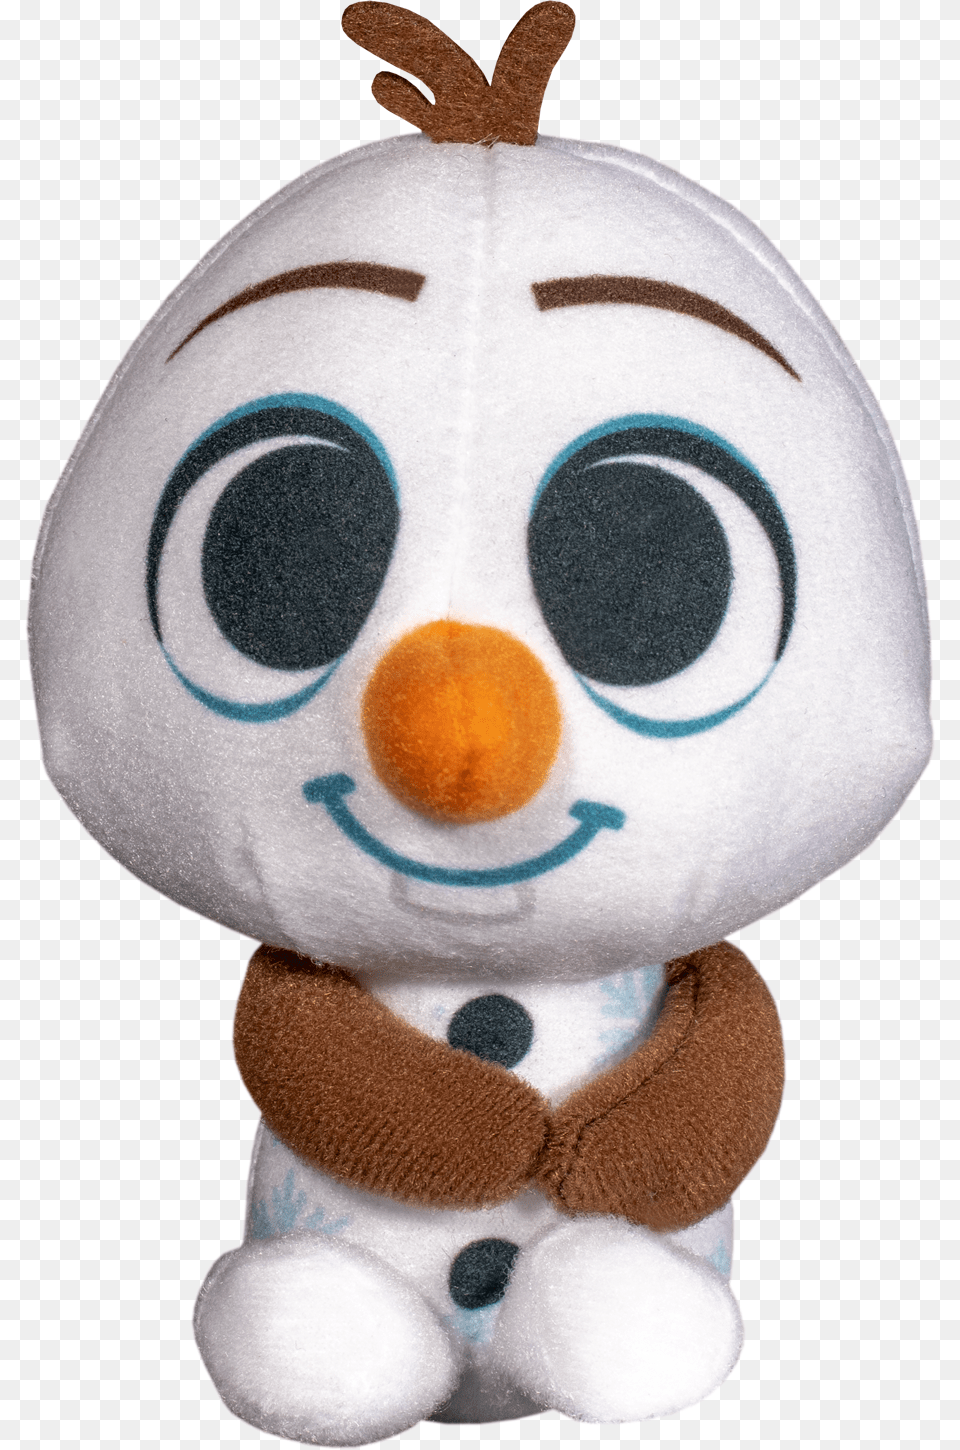 Olaf Plushies 4 Plush Stuffed Toy Free Png Download